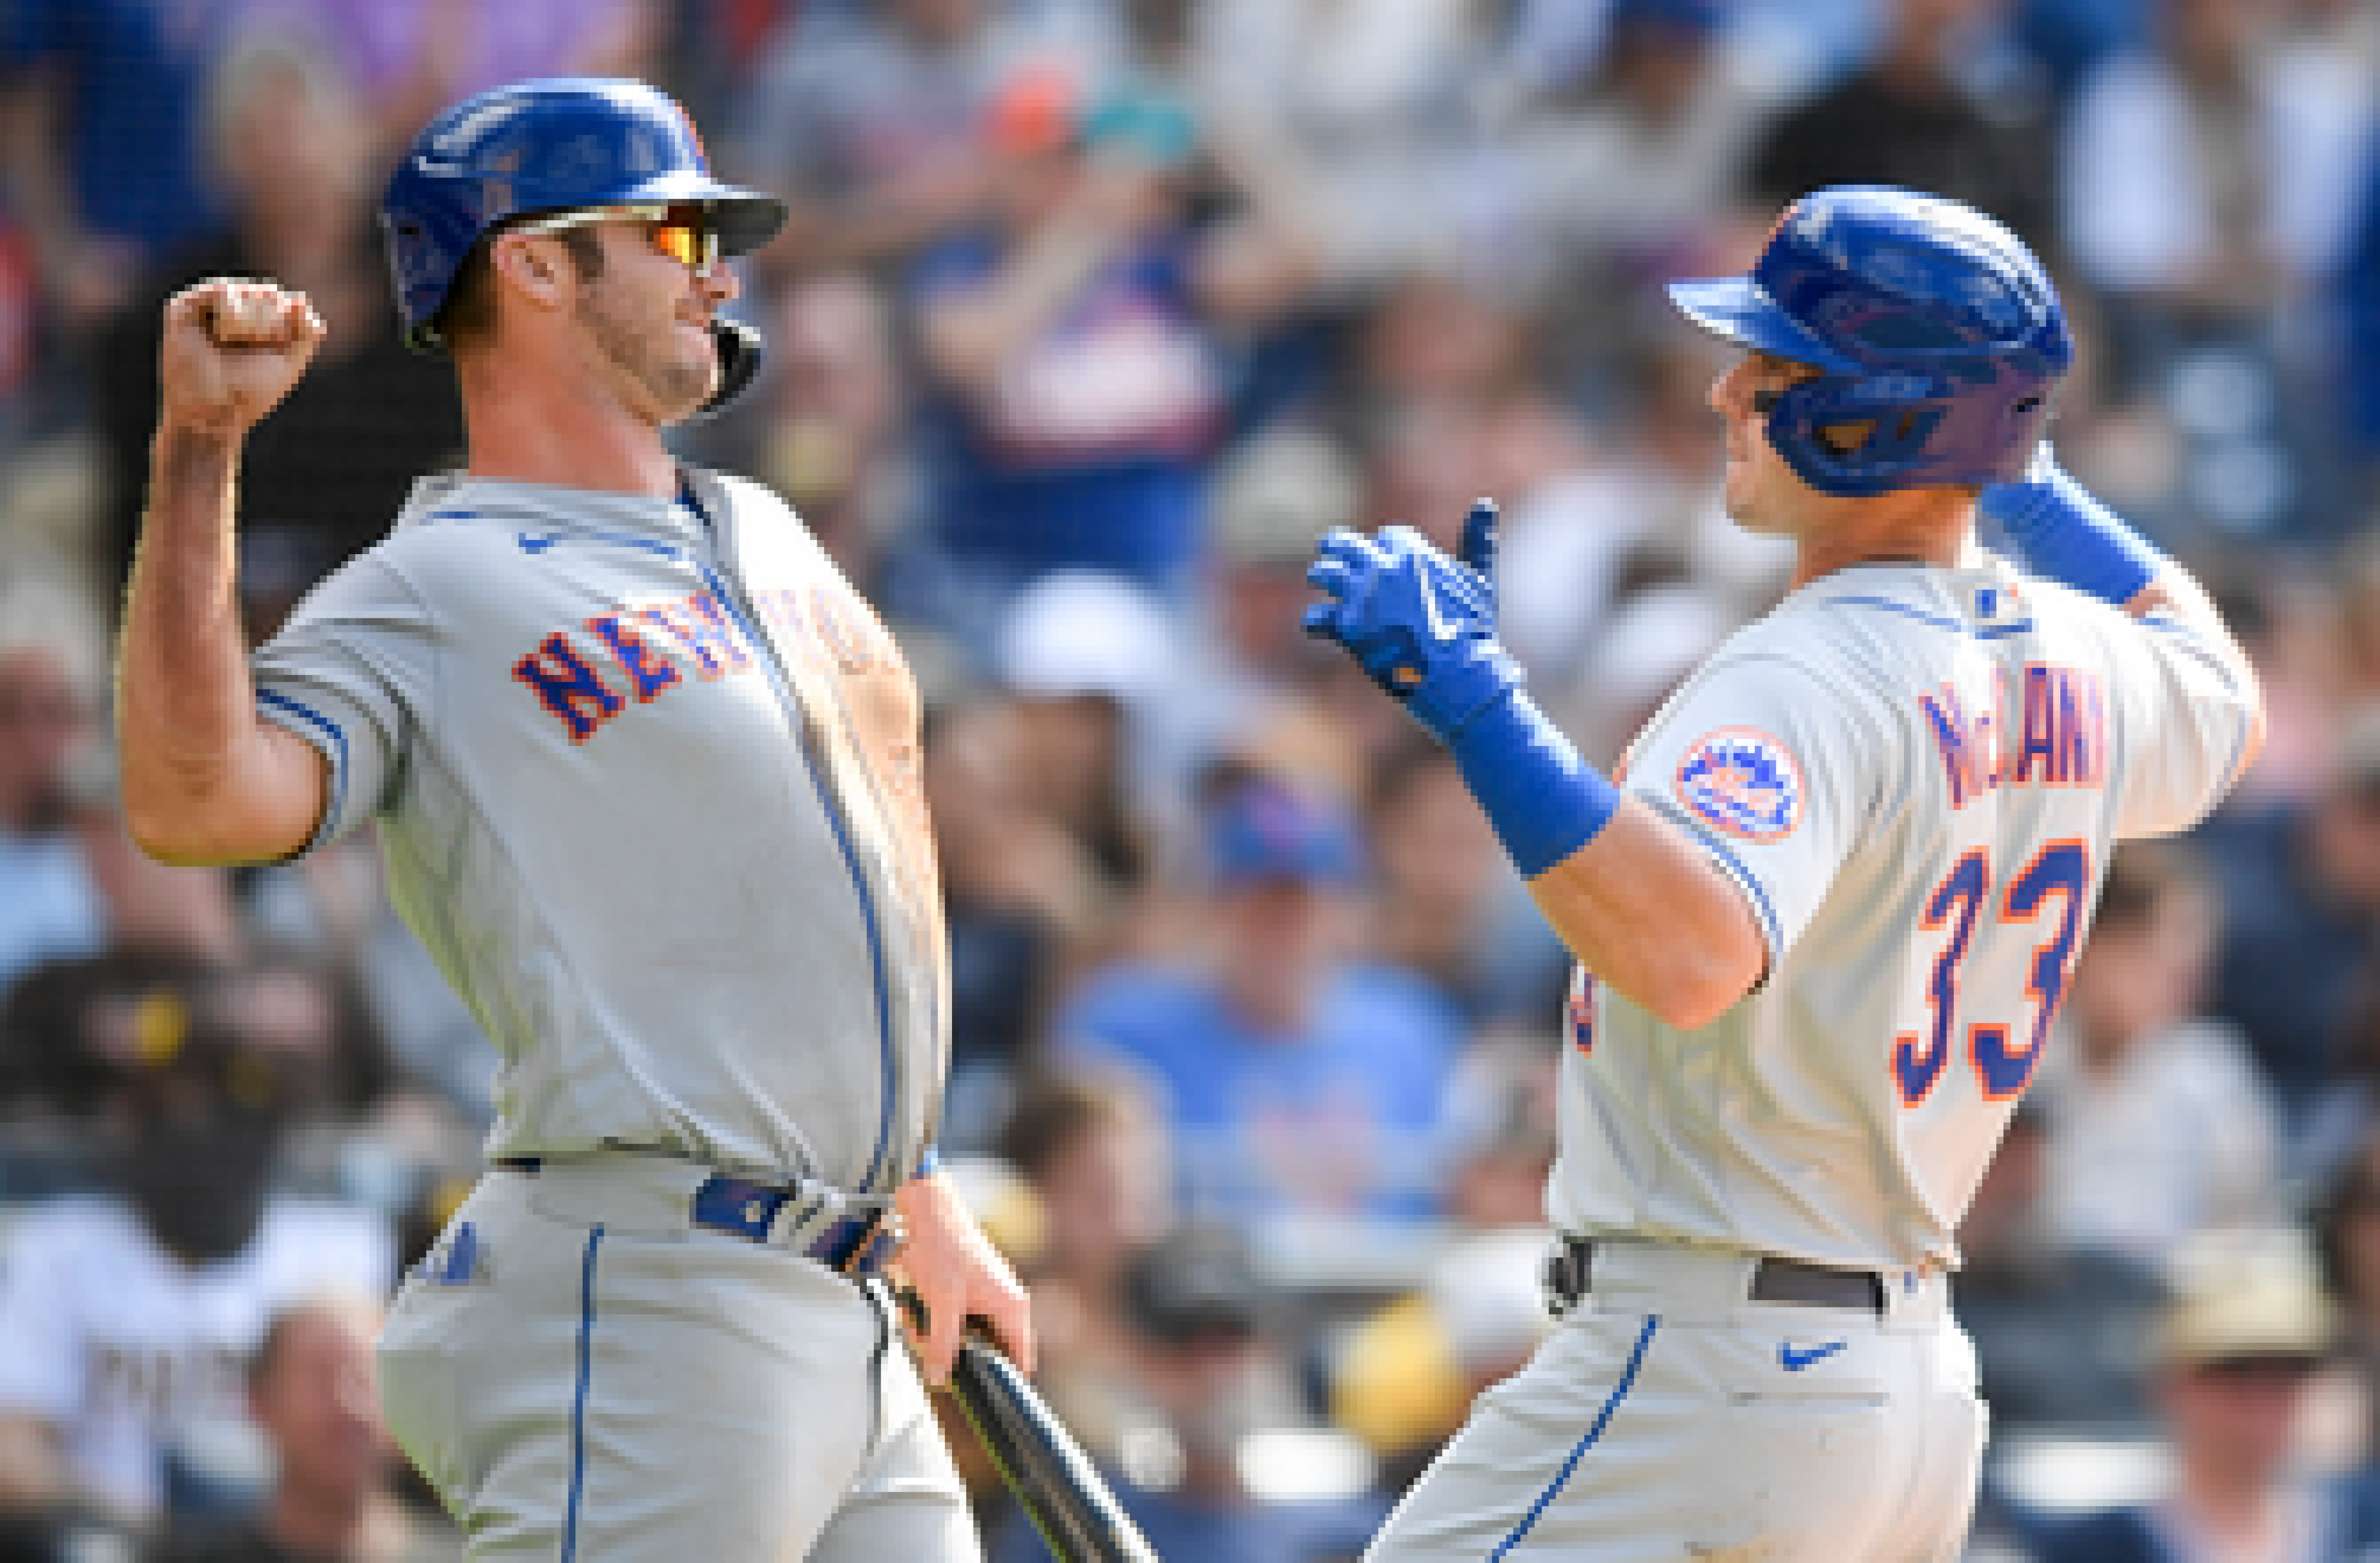 James McCann, Dominic Smith go deep to carry Mets past Padres, 6-2